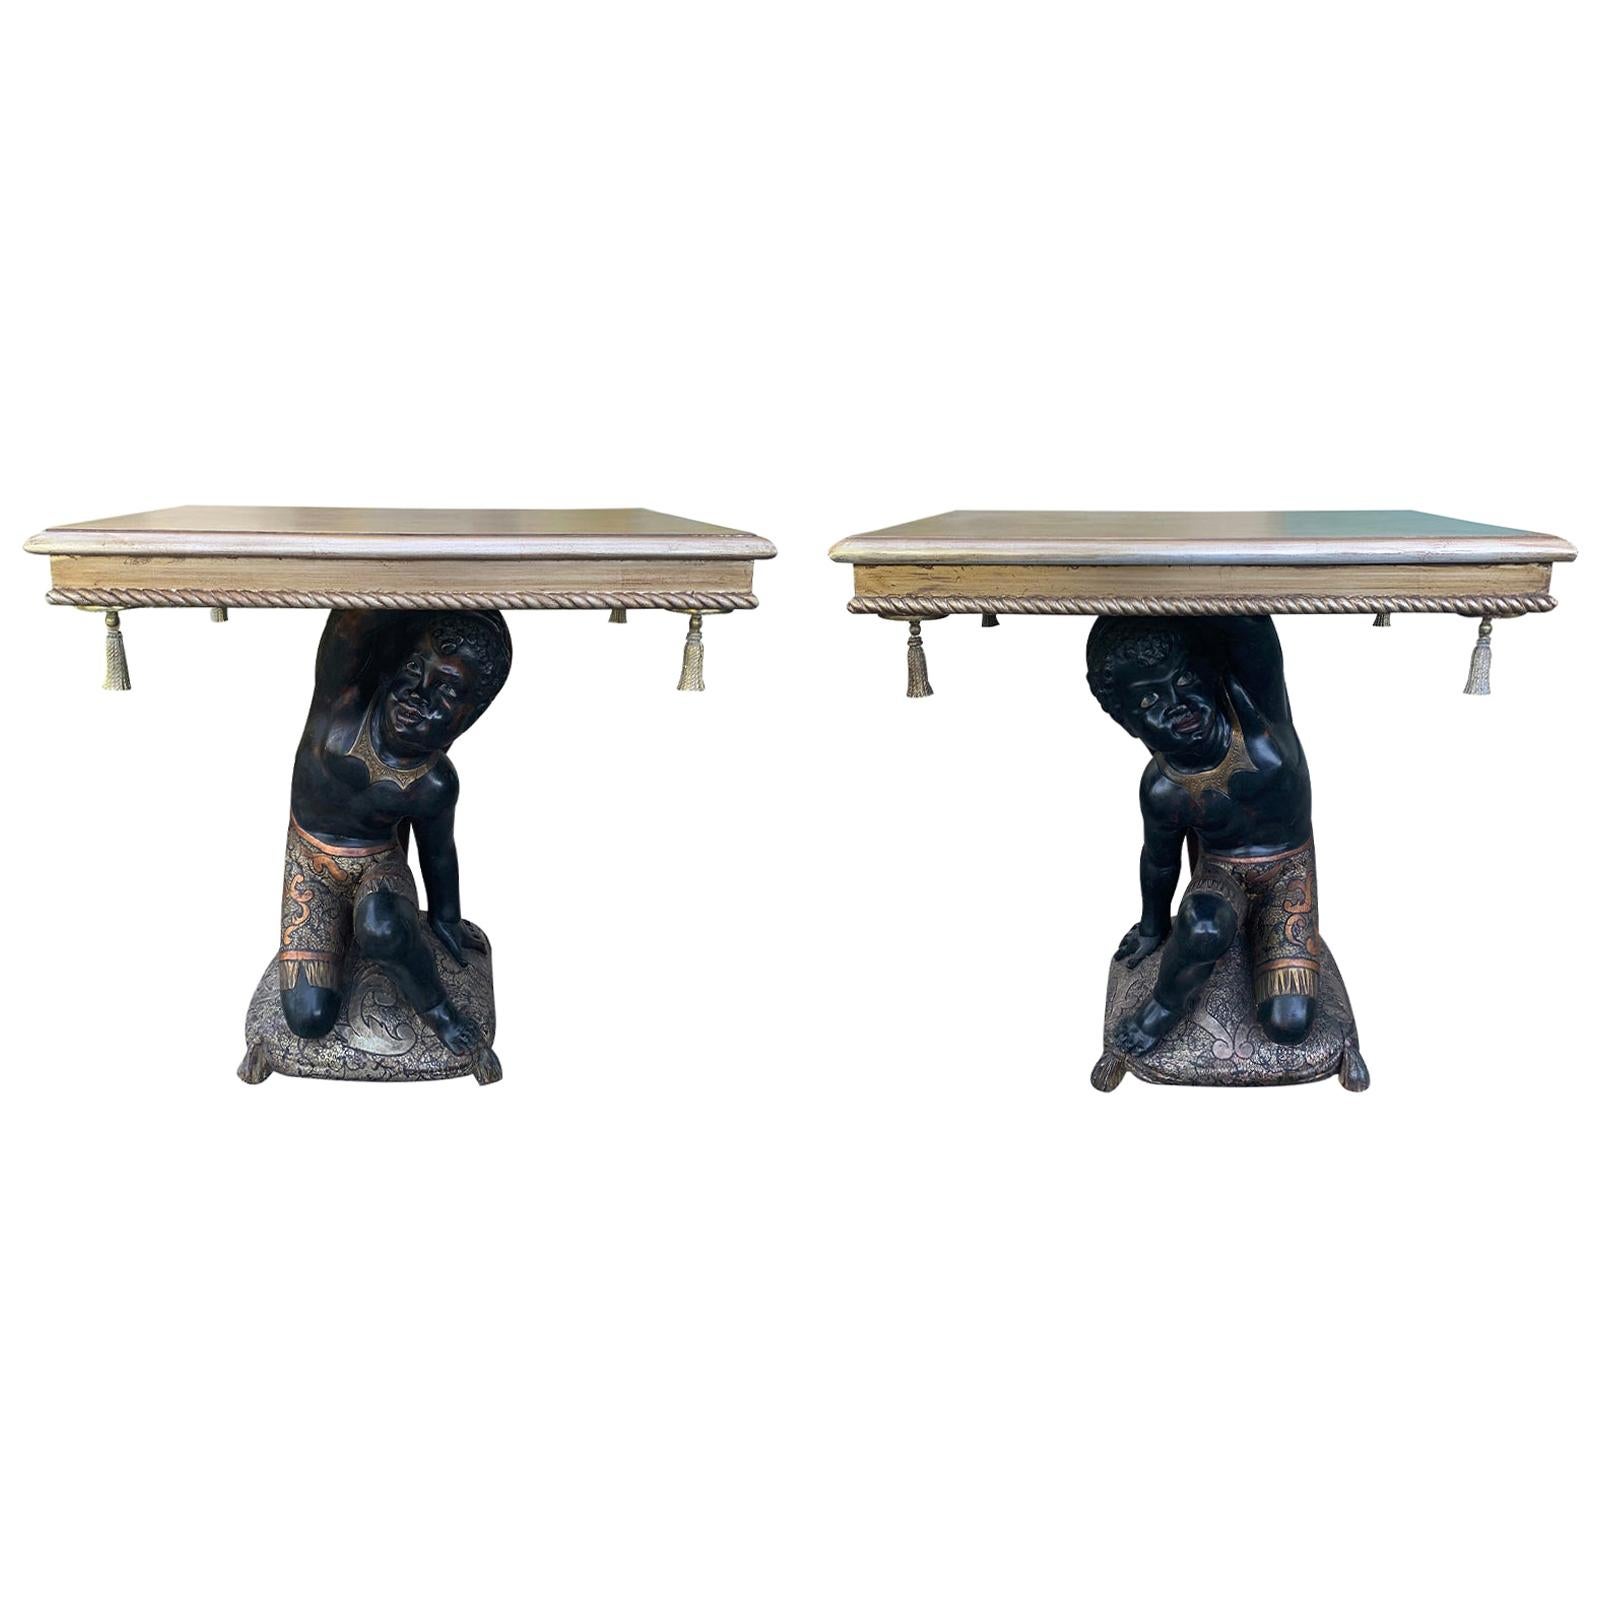 Pair of 19th-20th Century Giltwood & Polychrome Side Tables with Brass Tassels